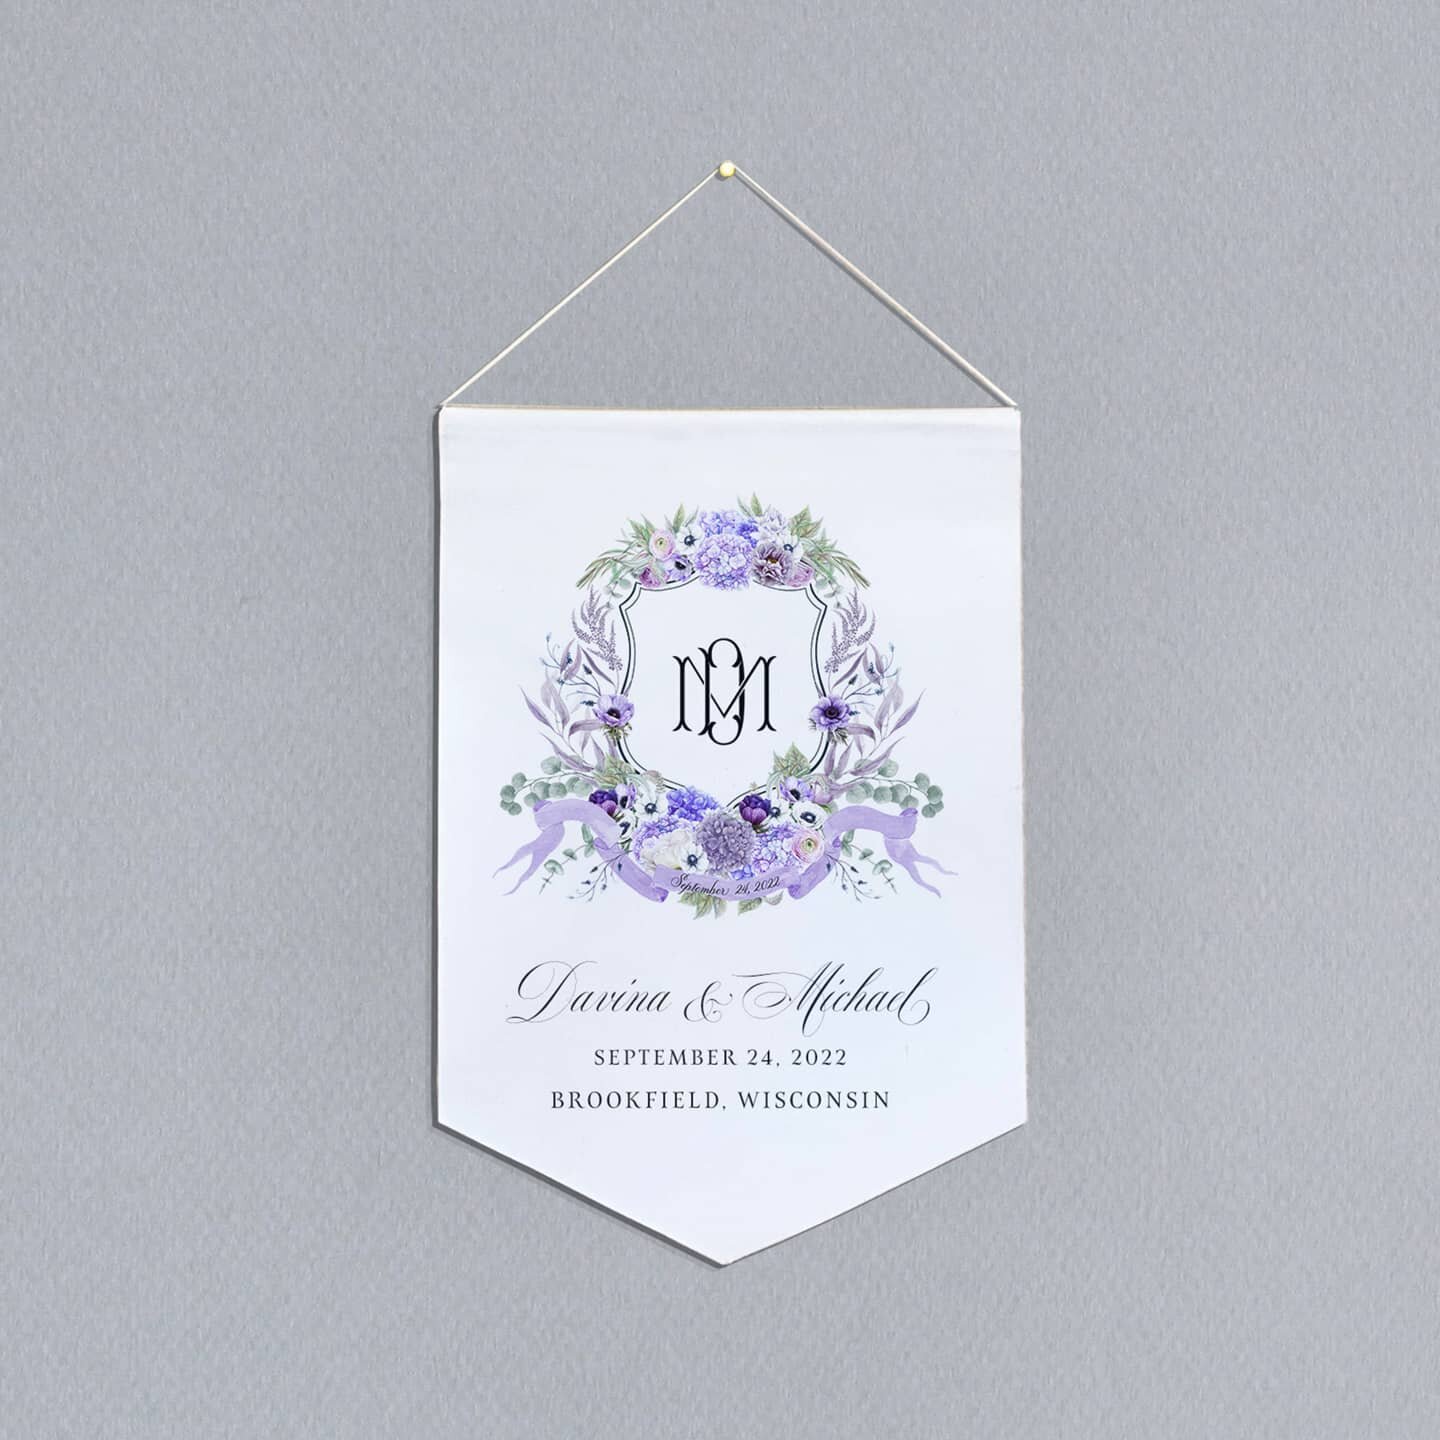 I'm super excited about these pretty banners that @stationeryhq added to their product line! These have been on my wish list for awhile now. They are perfect for displaying a wedding crest welcome on your big day, and then can transition into your ho